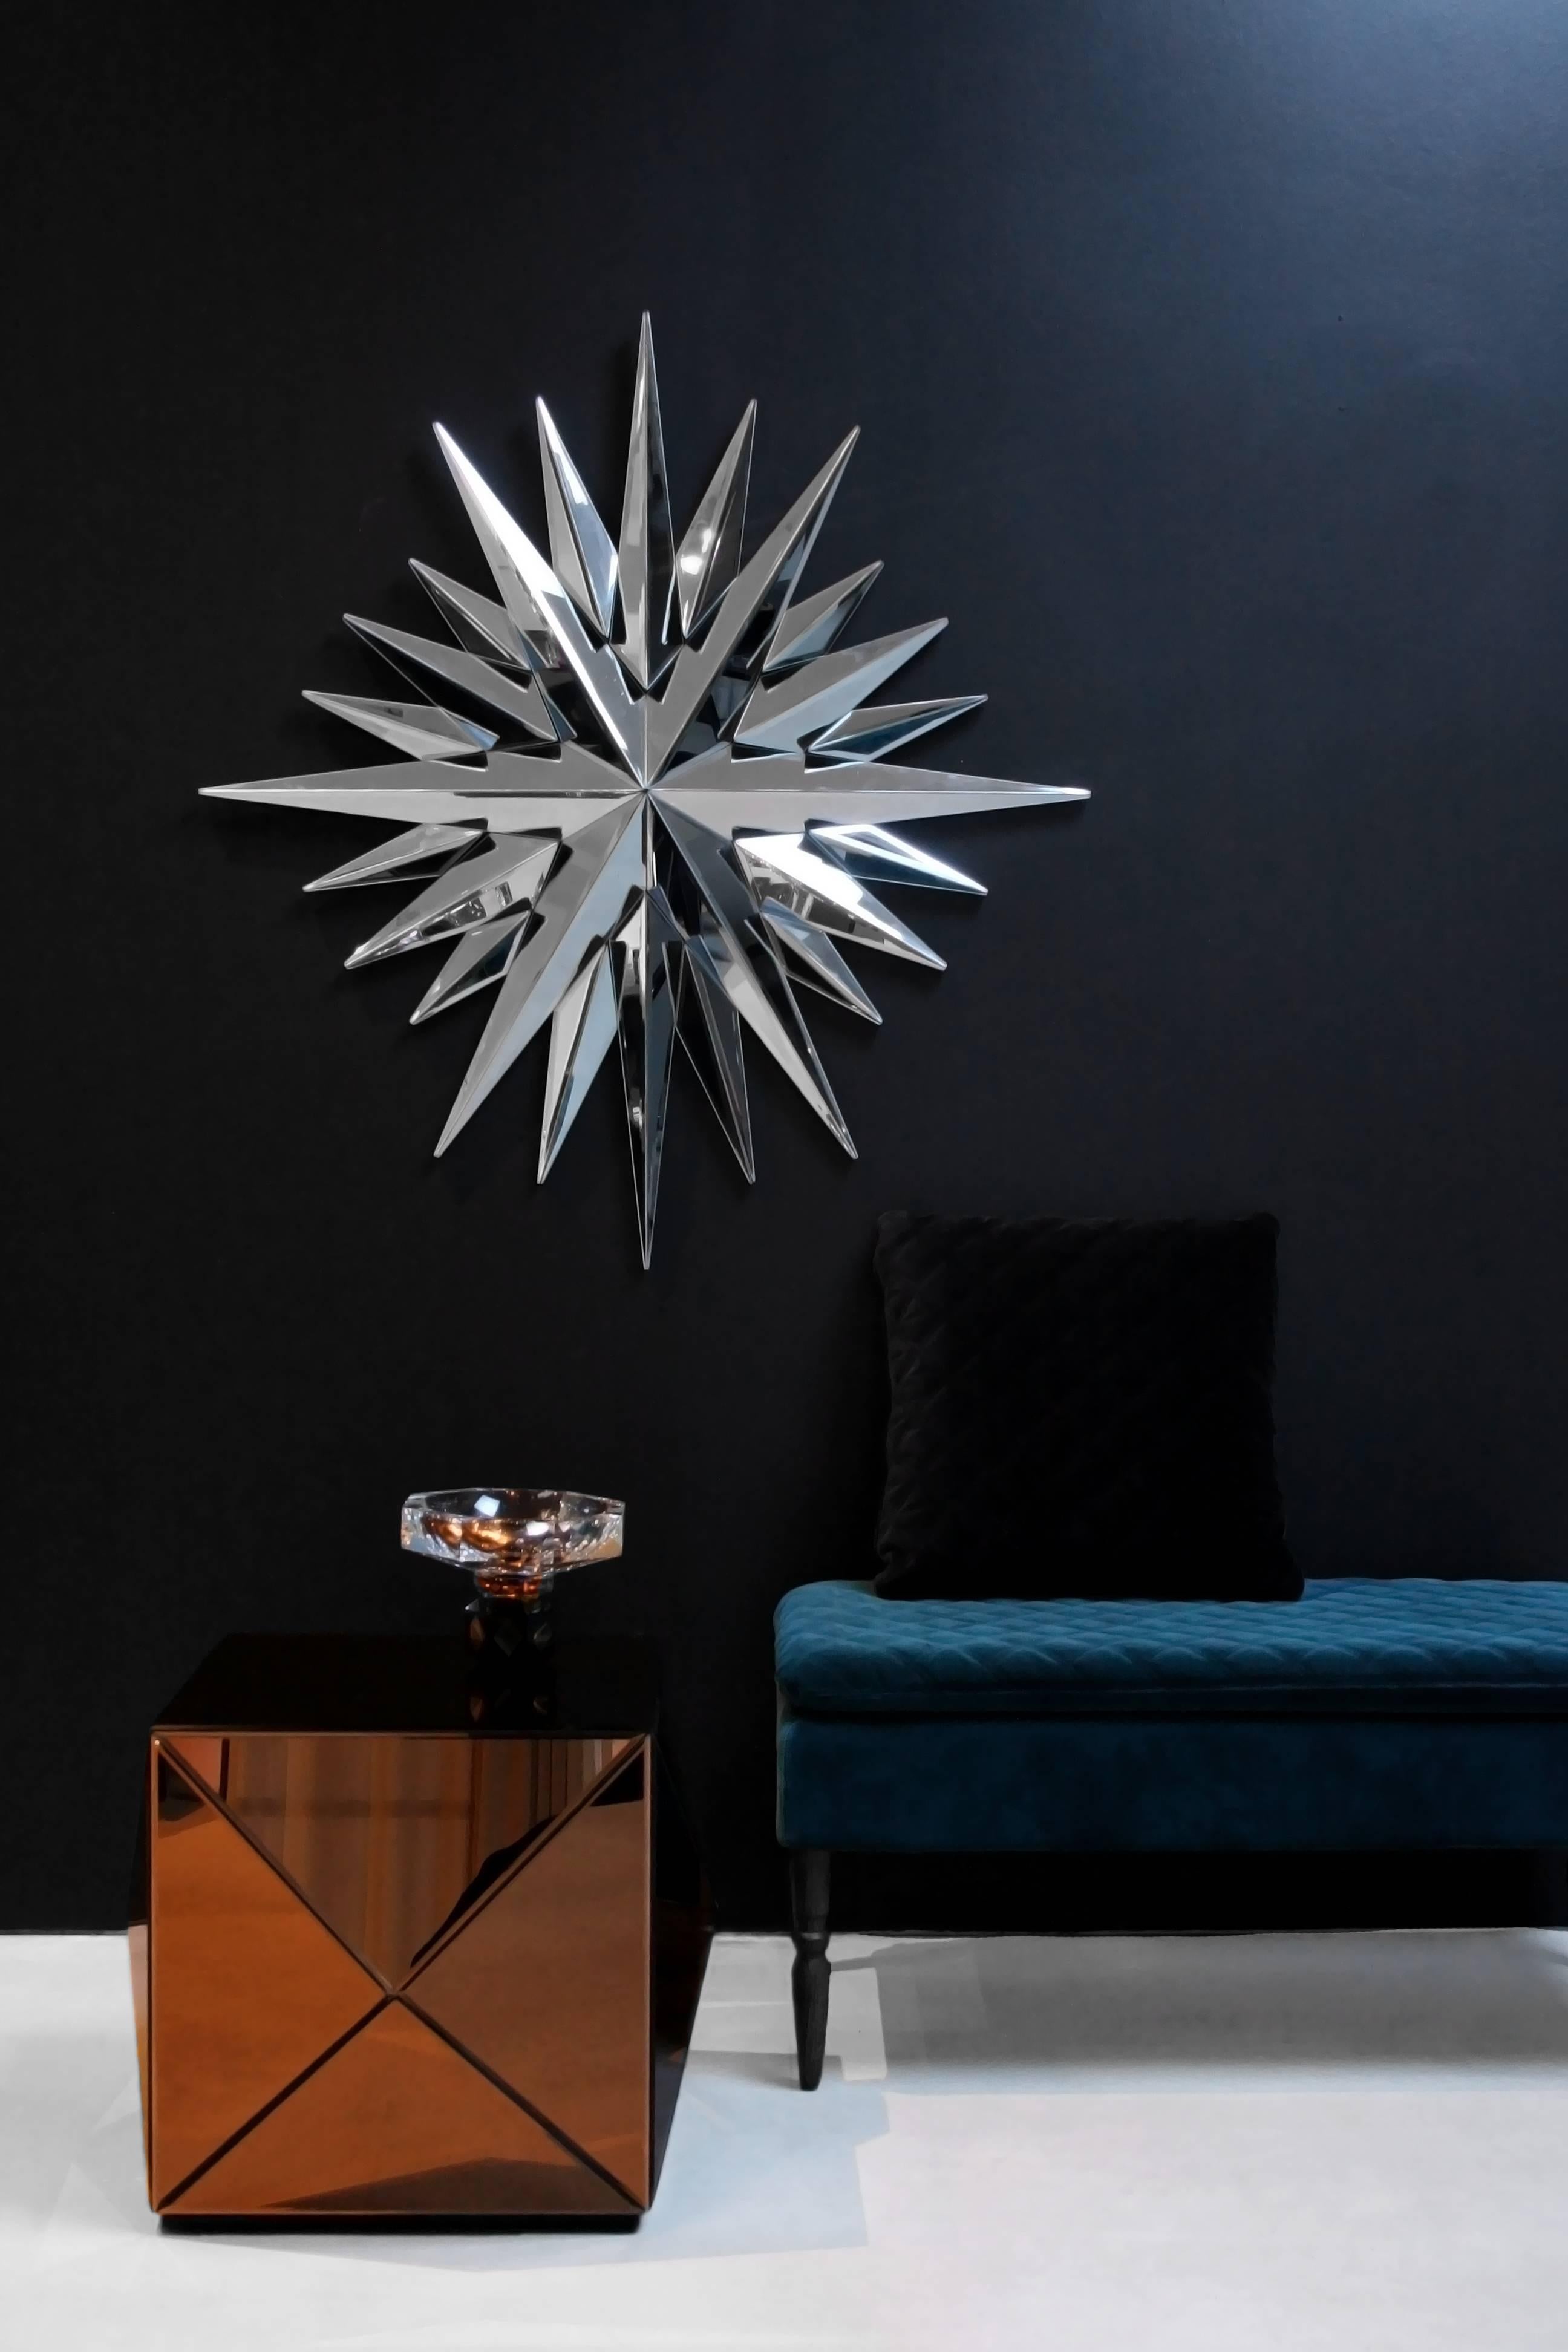 Super Star
Mirror
4mm faceted mirror on black painted mdf
Measures: L 108 x H 116 x D 4.8 cm

The Super Star mirror will reflect the beauty of your space and convey a simply yet dramatic eclectic style to any room.

Reflections Copenhagen, a